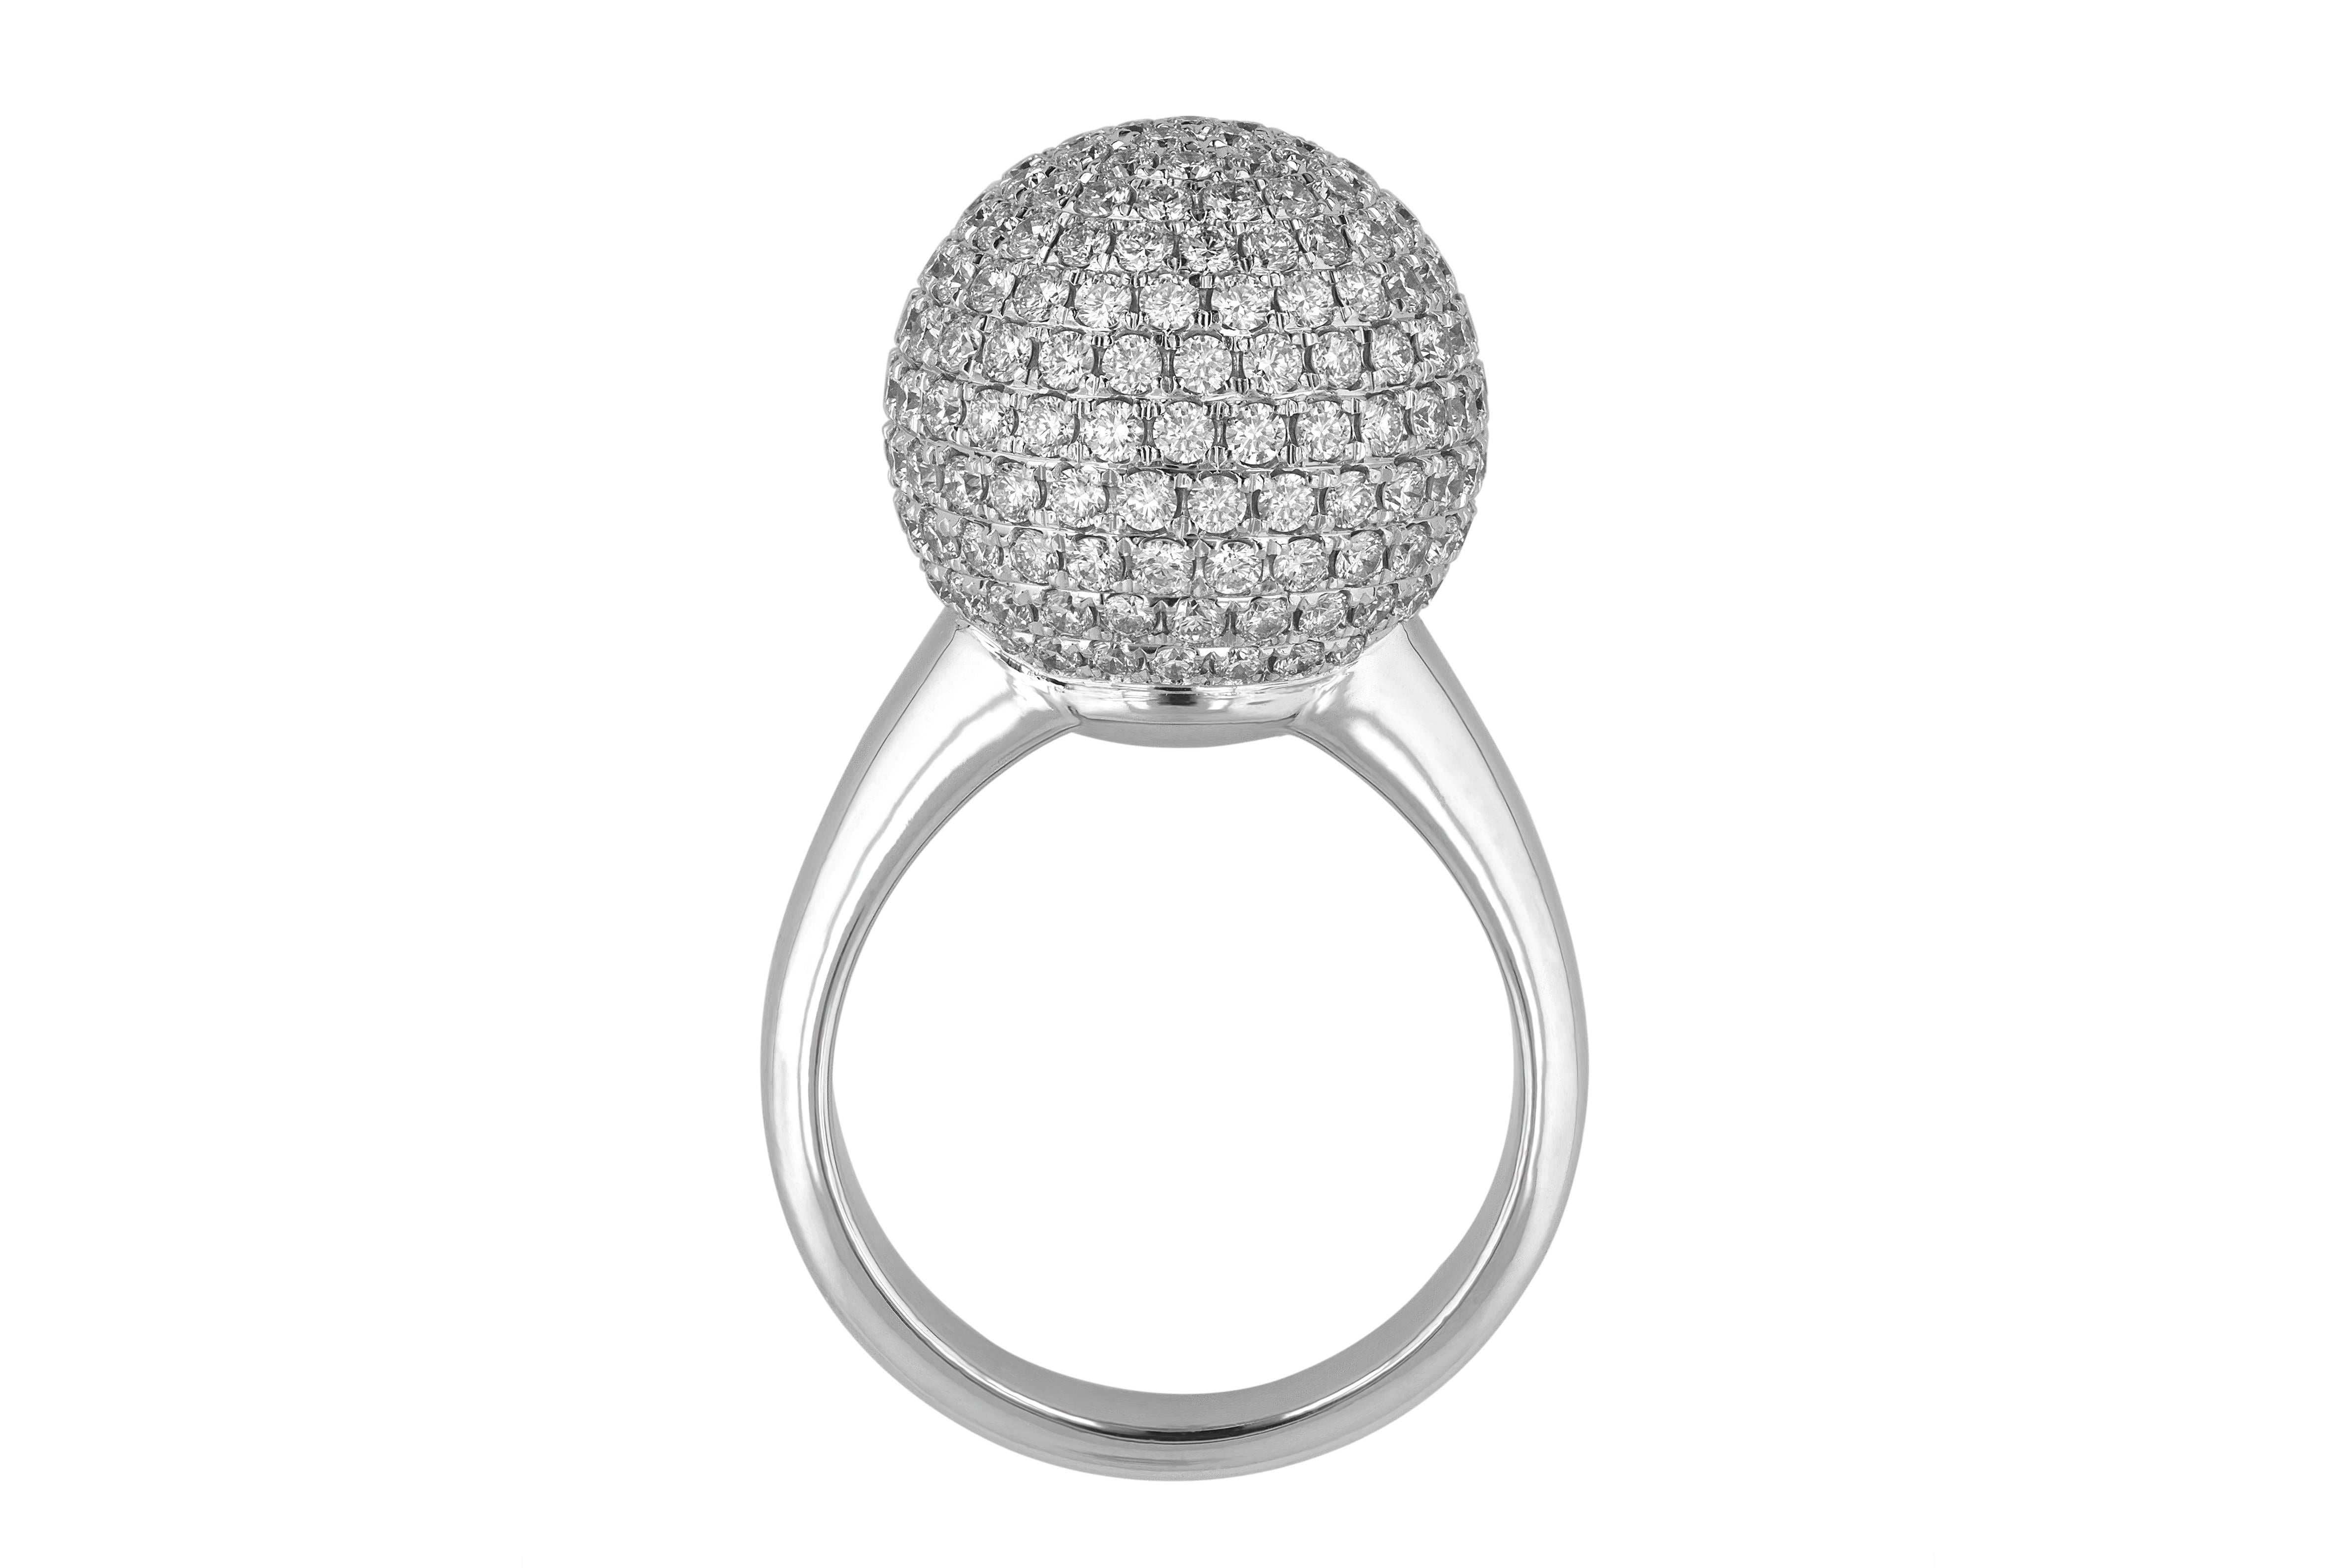 Brand new, one-of-a-kind, diamond cocktail ring. This unique statement piece features a total of 3.10 carats of natural white diamonds, set in white gold. The ring is a size 6 and can be adjusted by us for a perfect fit. The ring has a total gold